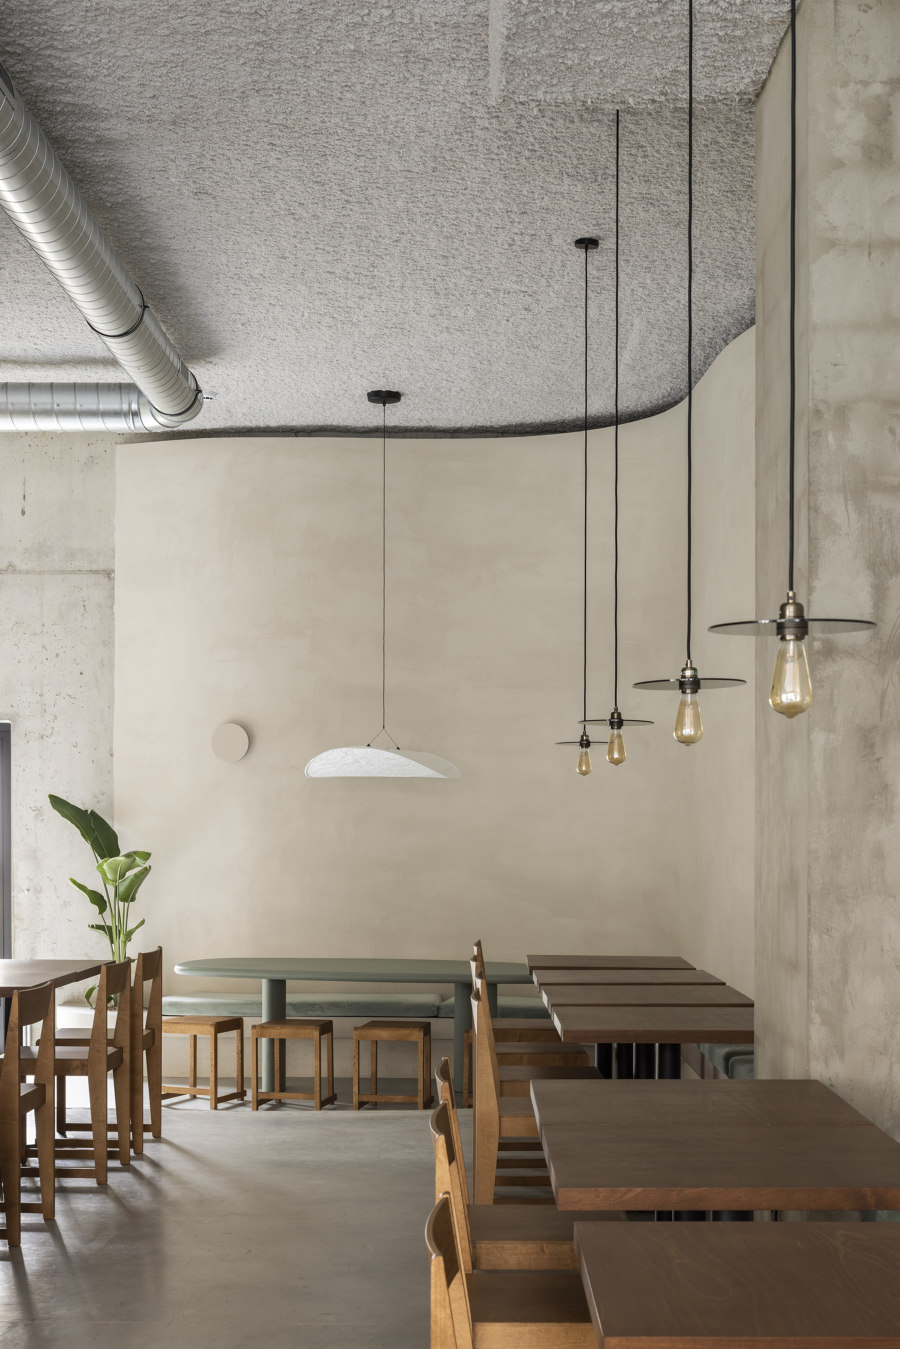 SEVEN by Sill and Sound Architects | Café interiors